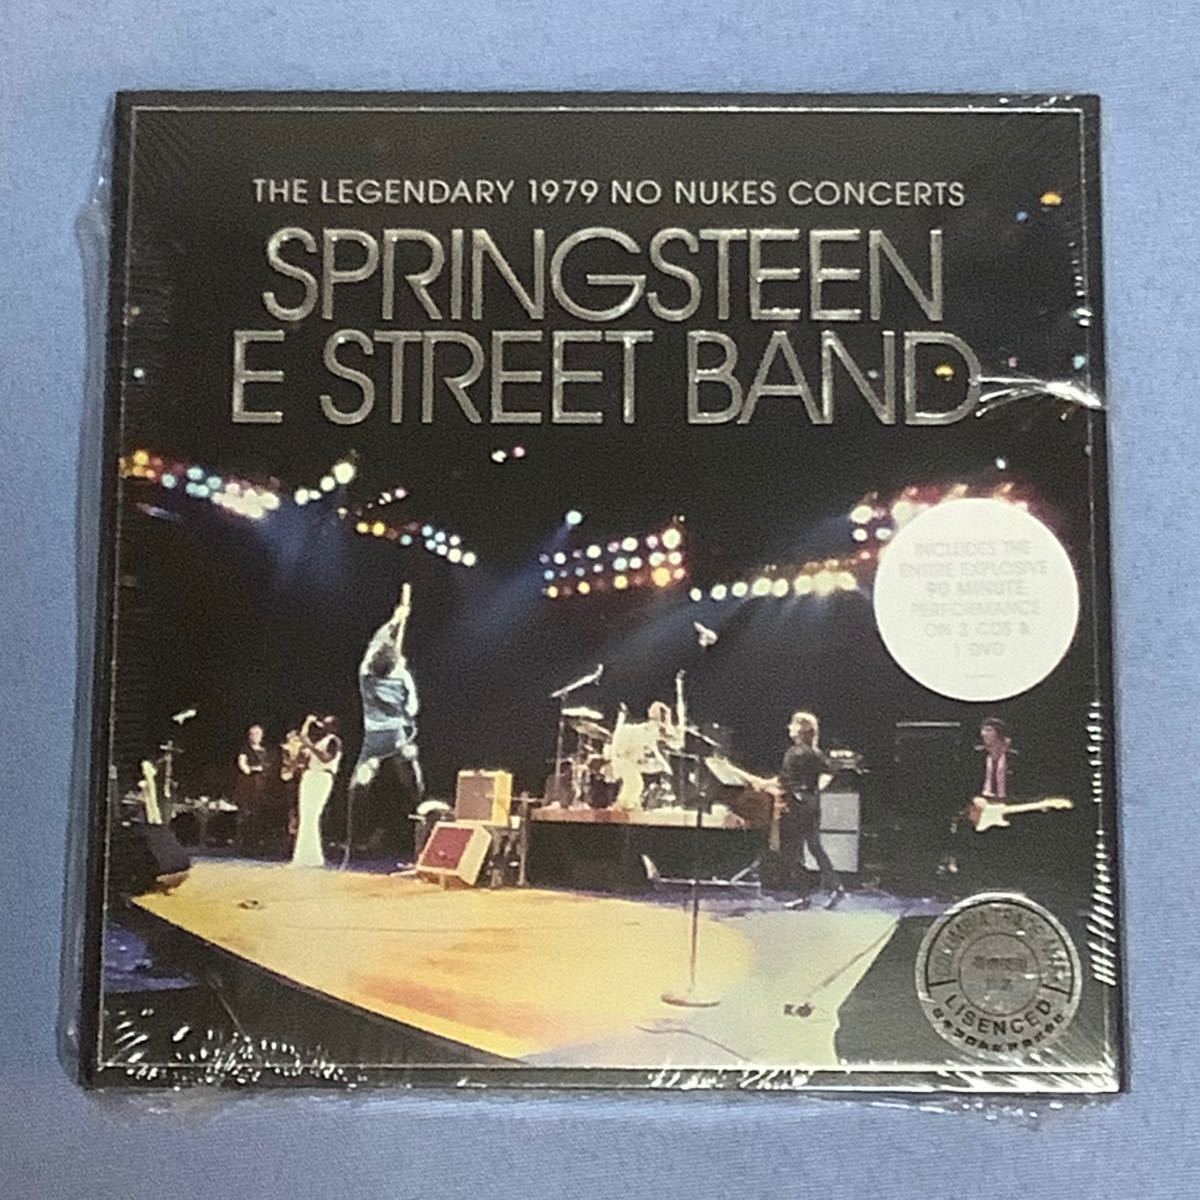 Bruce Springsteen Legendary 1979 No Nukes Concerts (2CD＋DVD) 輸入盤 